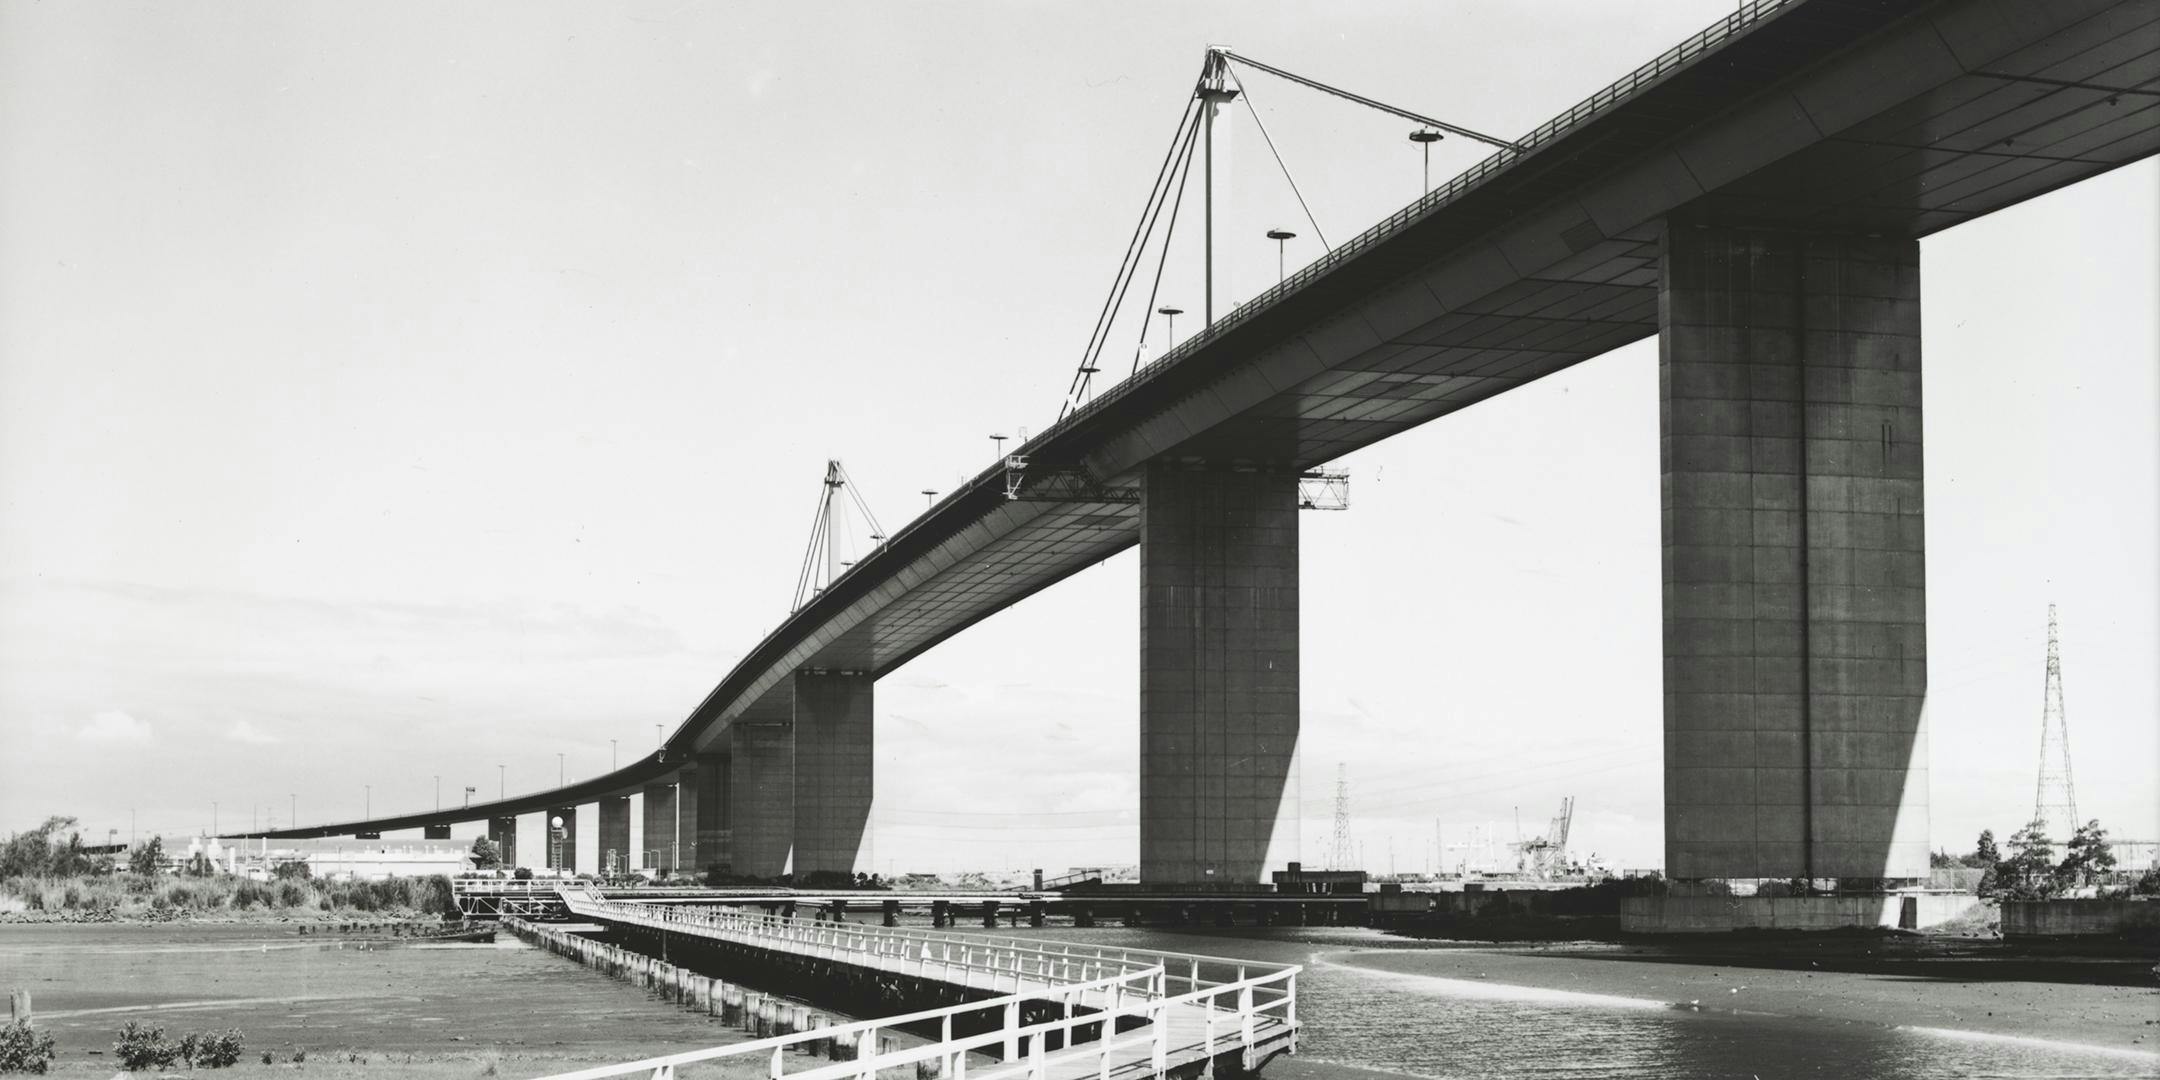 Docklands History Group: The Bridge